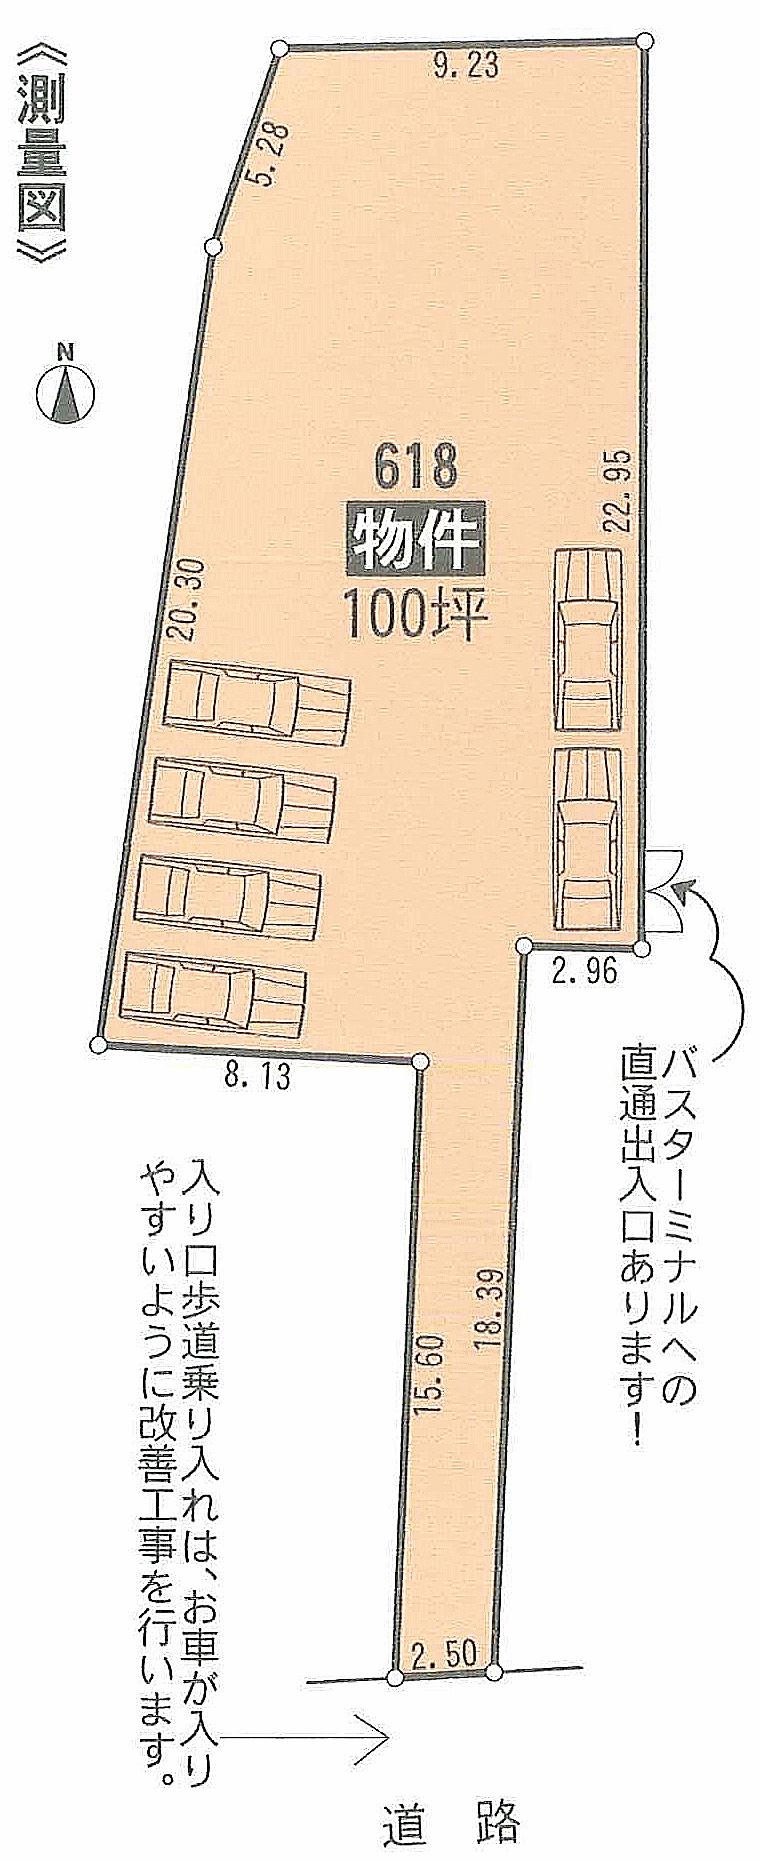 Compartment figure. Land price 32 million yen, Land area 332.66 sq m site area of ​​about 100 square meters